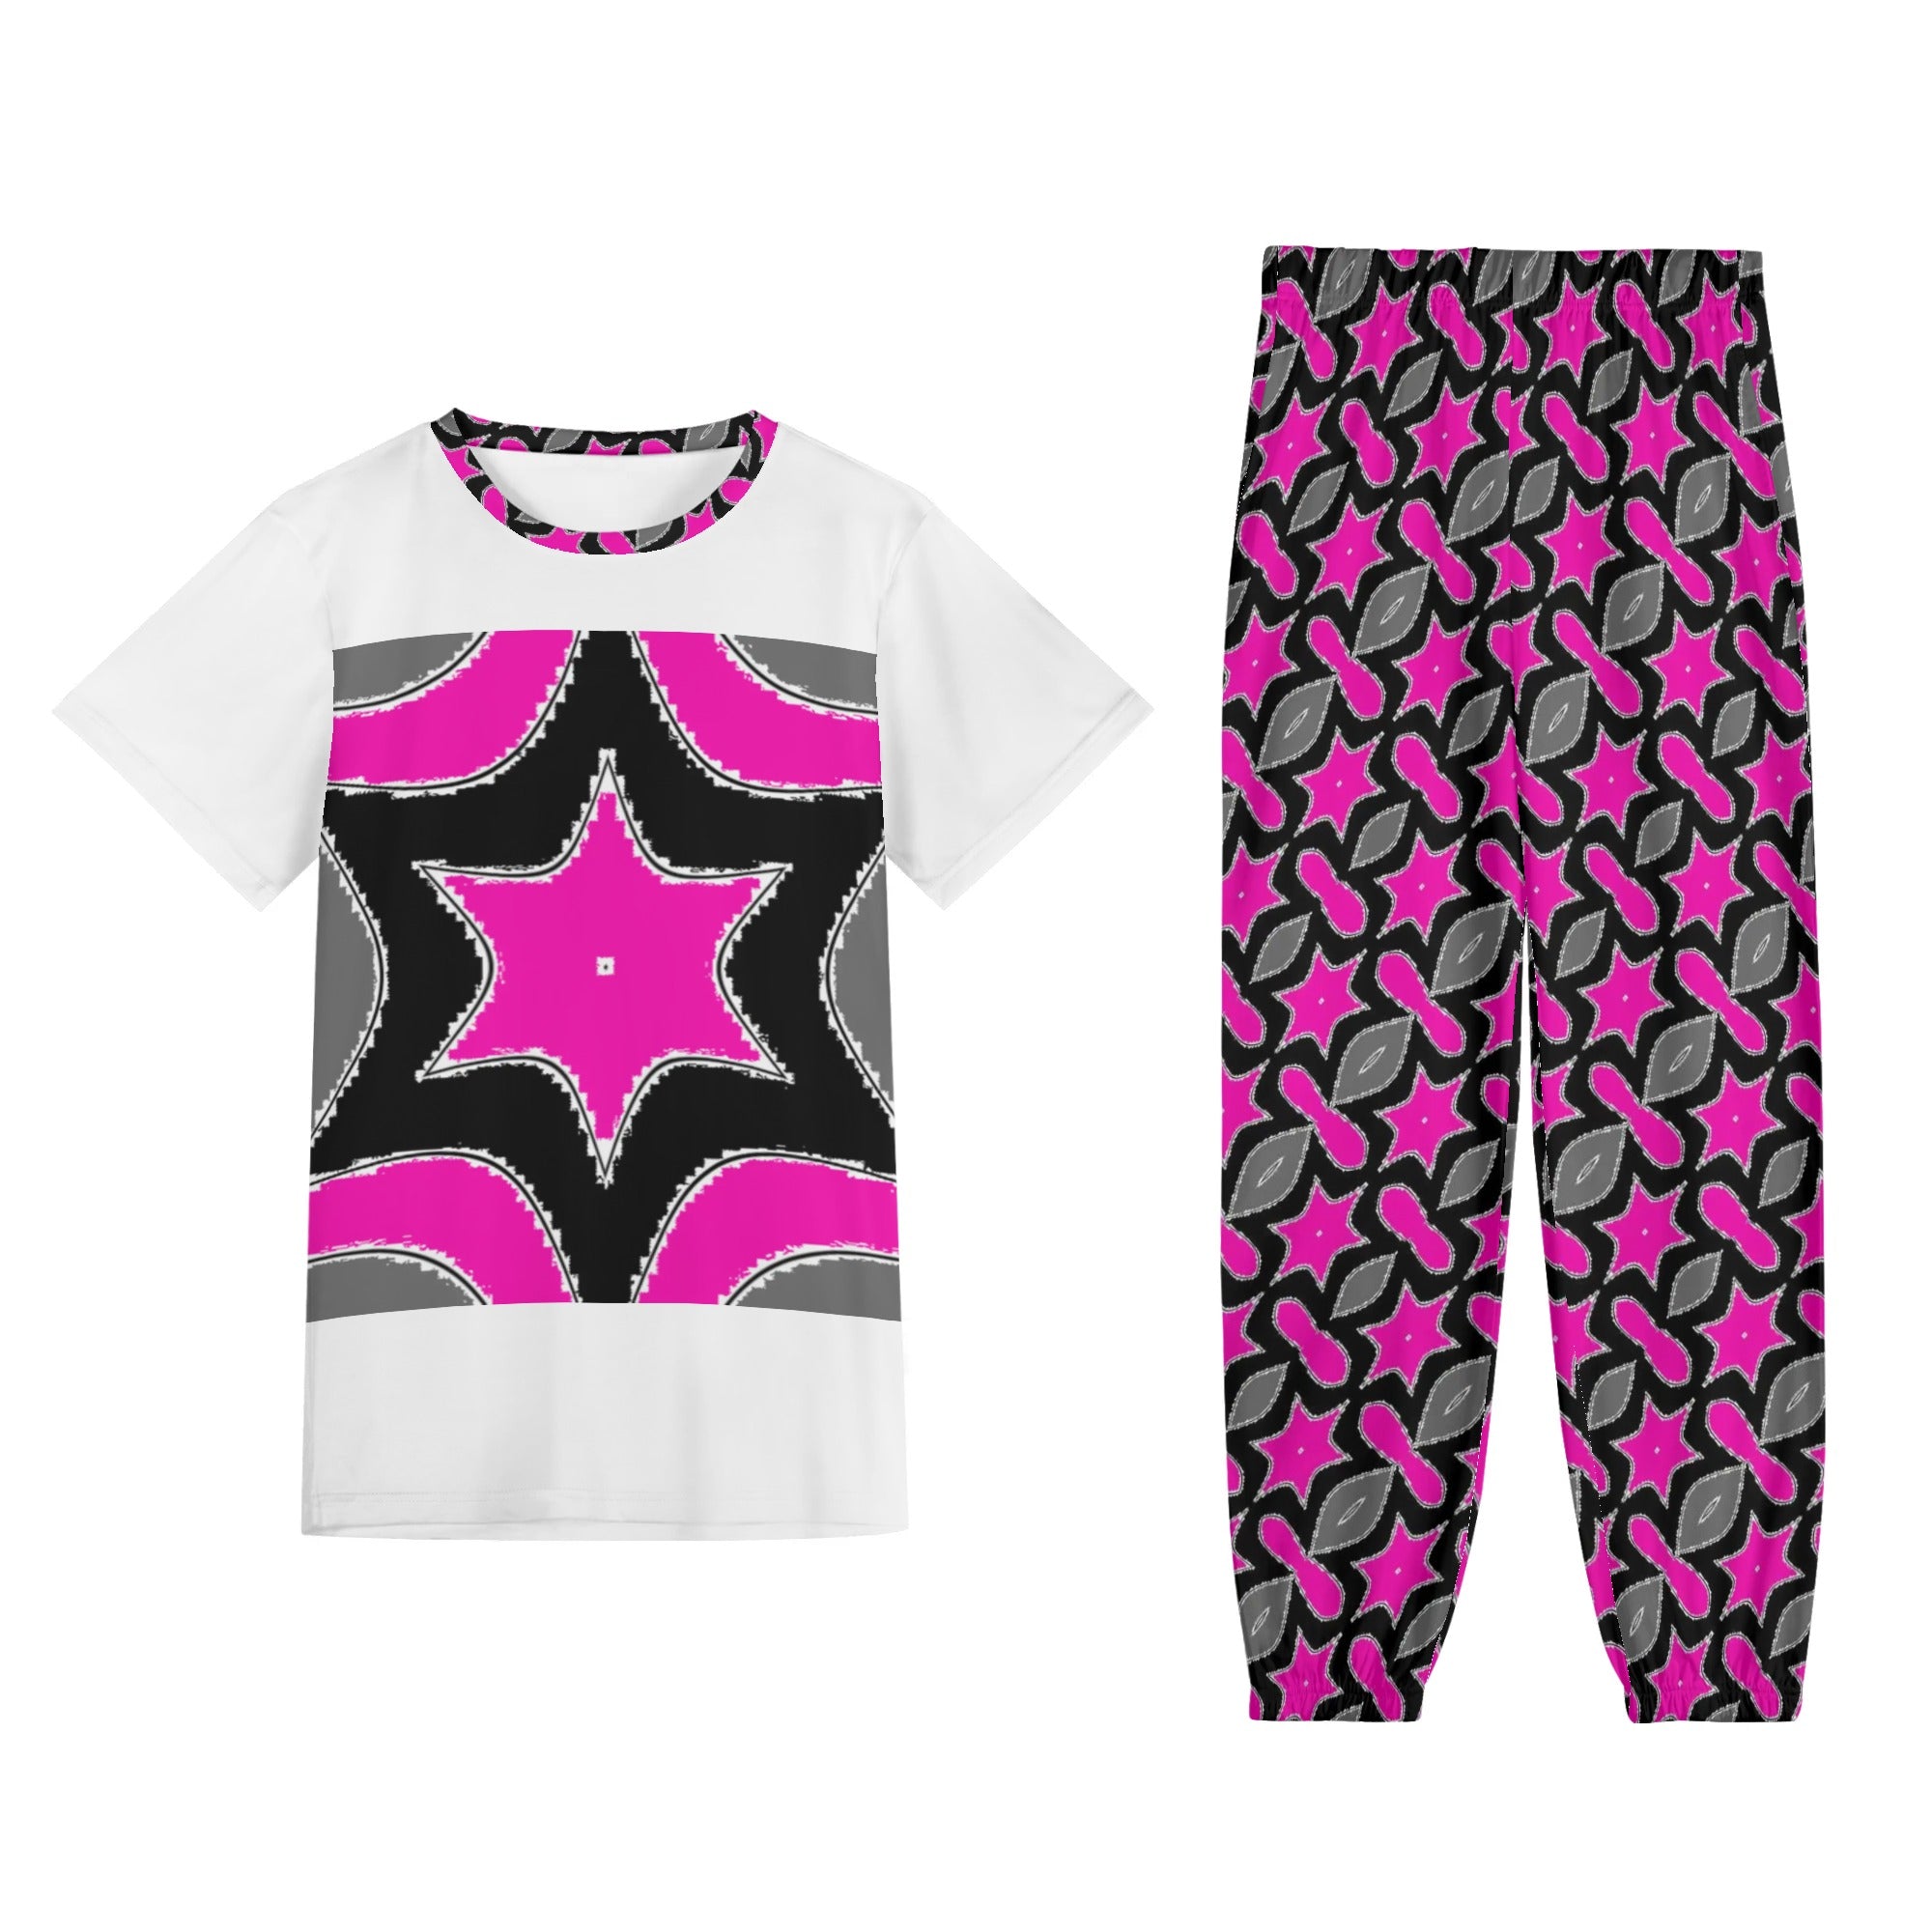 Pink Star Womens Short Sleeve Sports Outfit Set